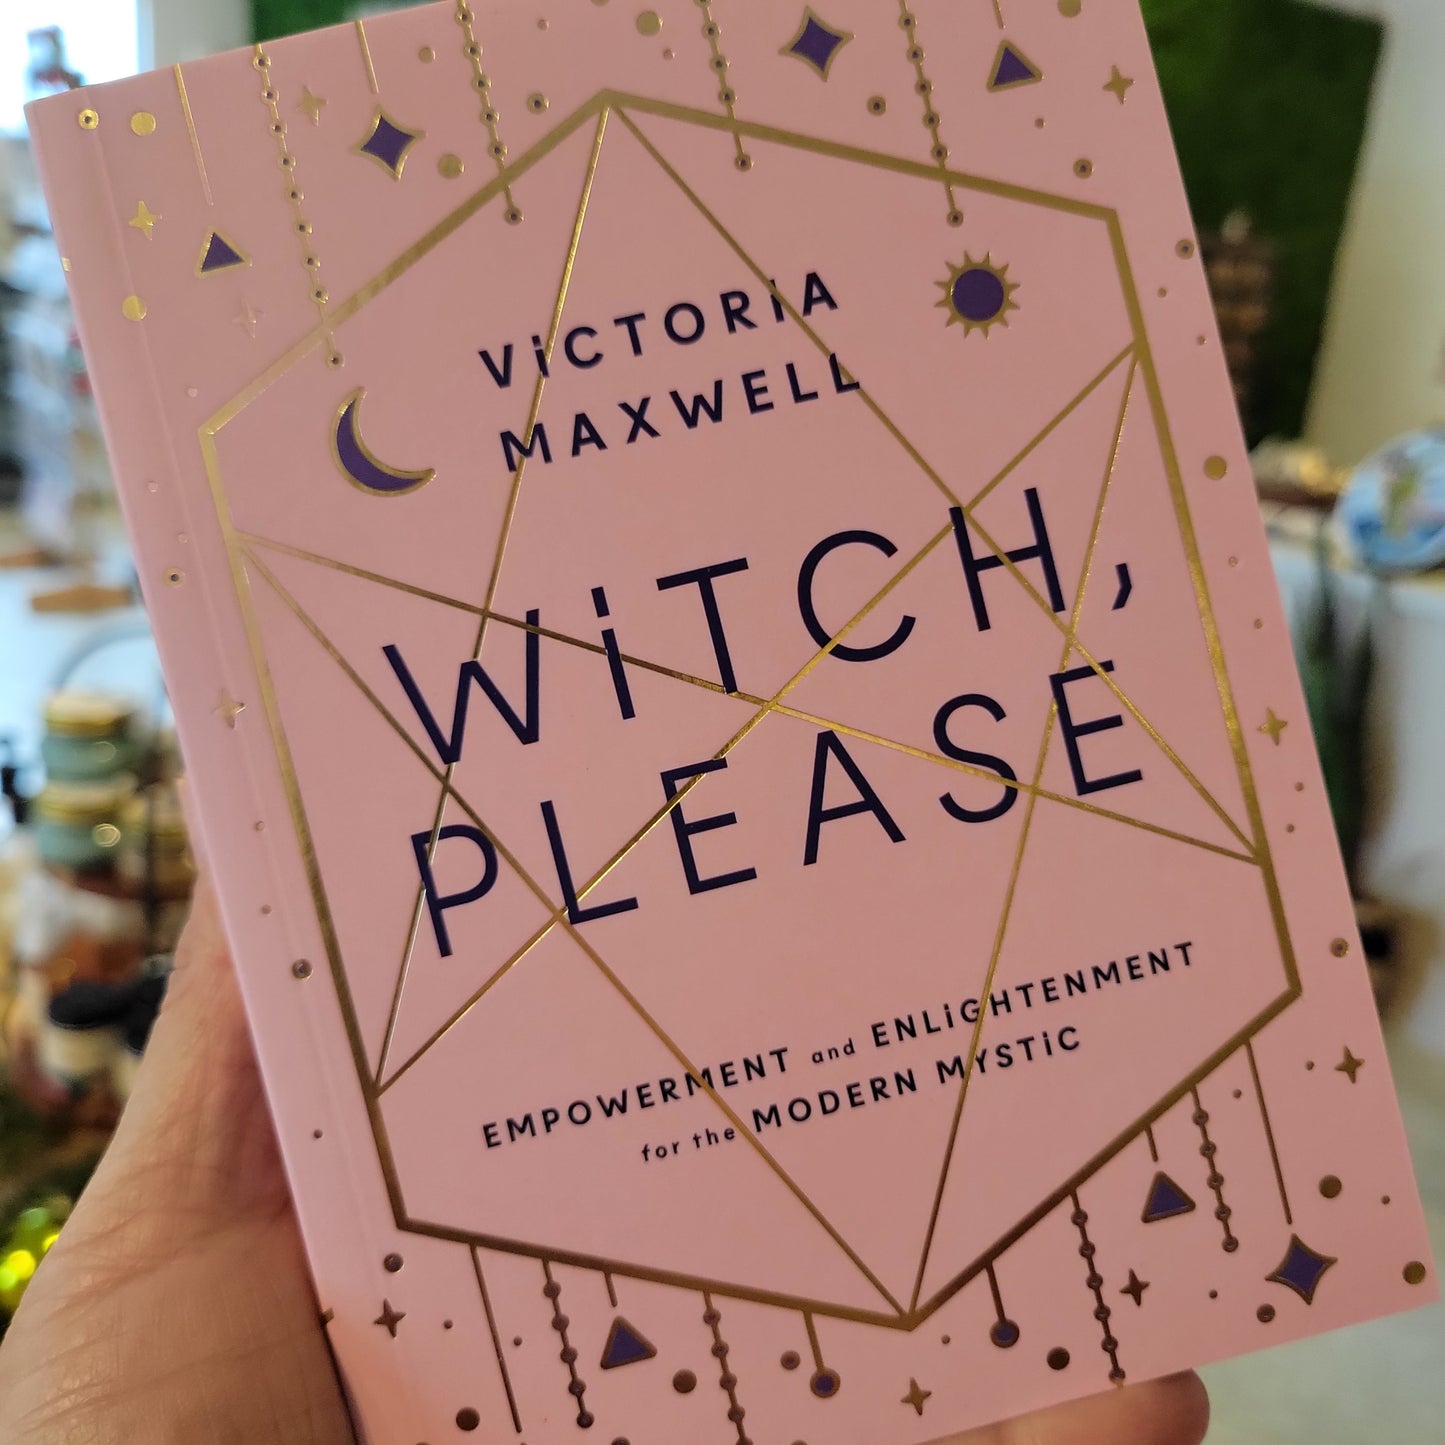 Witch, Please